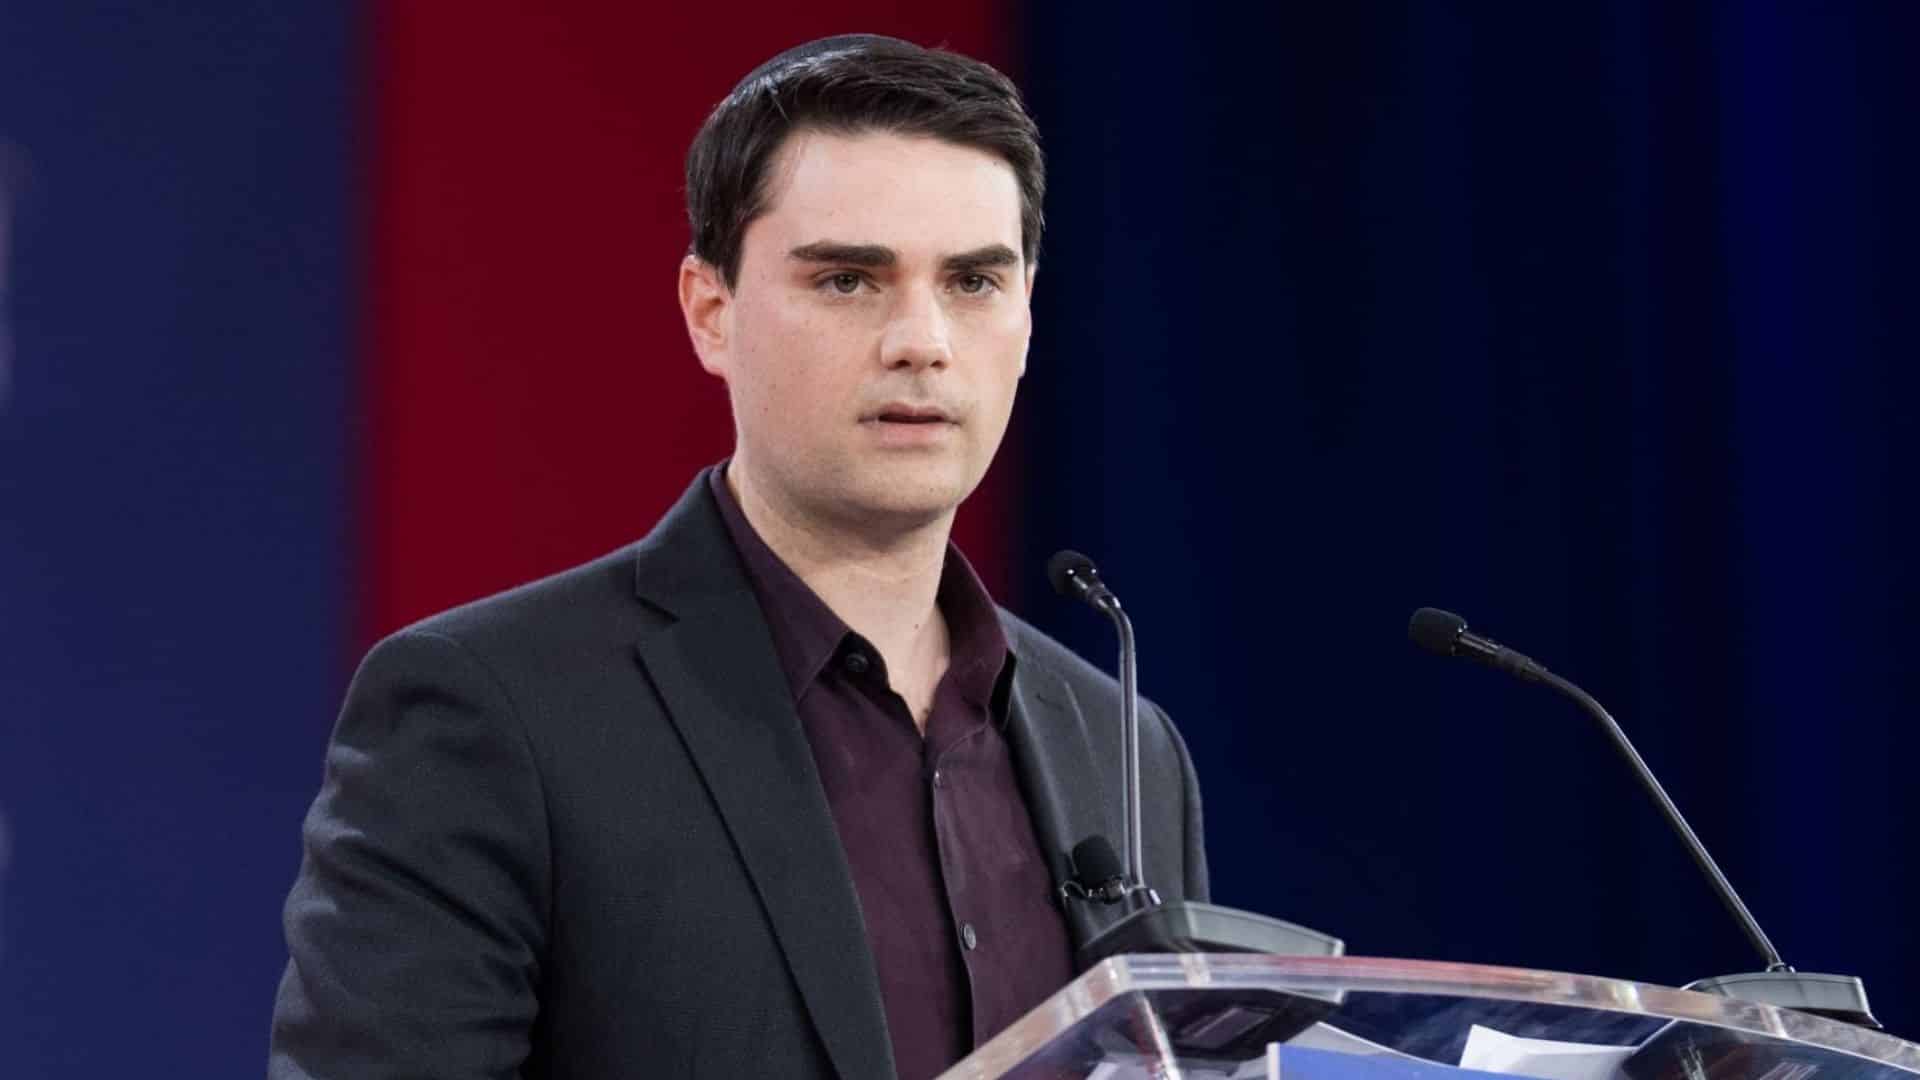 Ben Shapiro Net Worth 2022: How Much This Media Personality Earns?